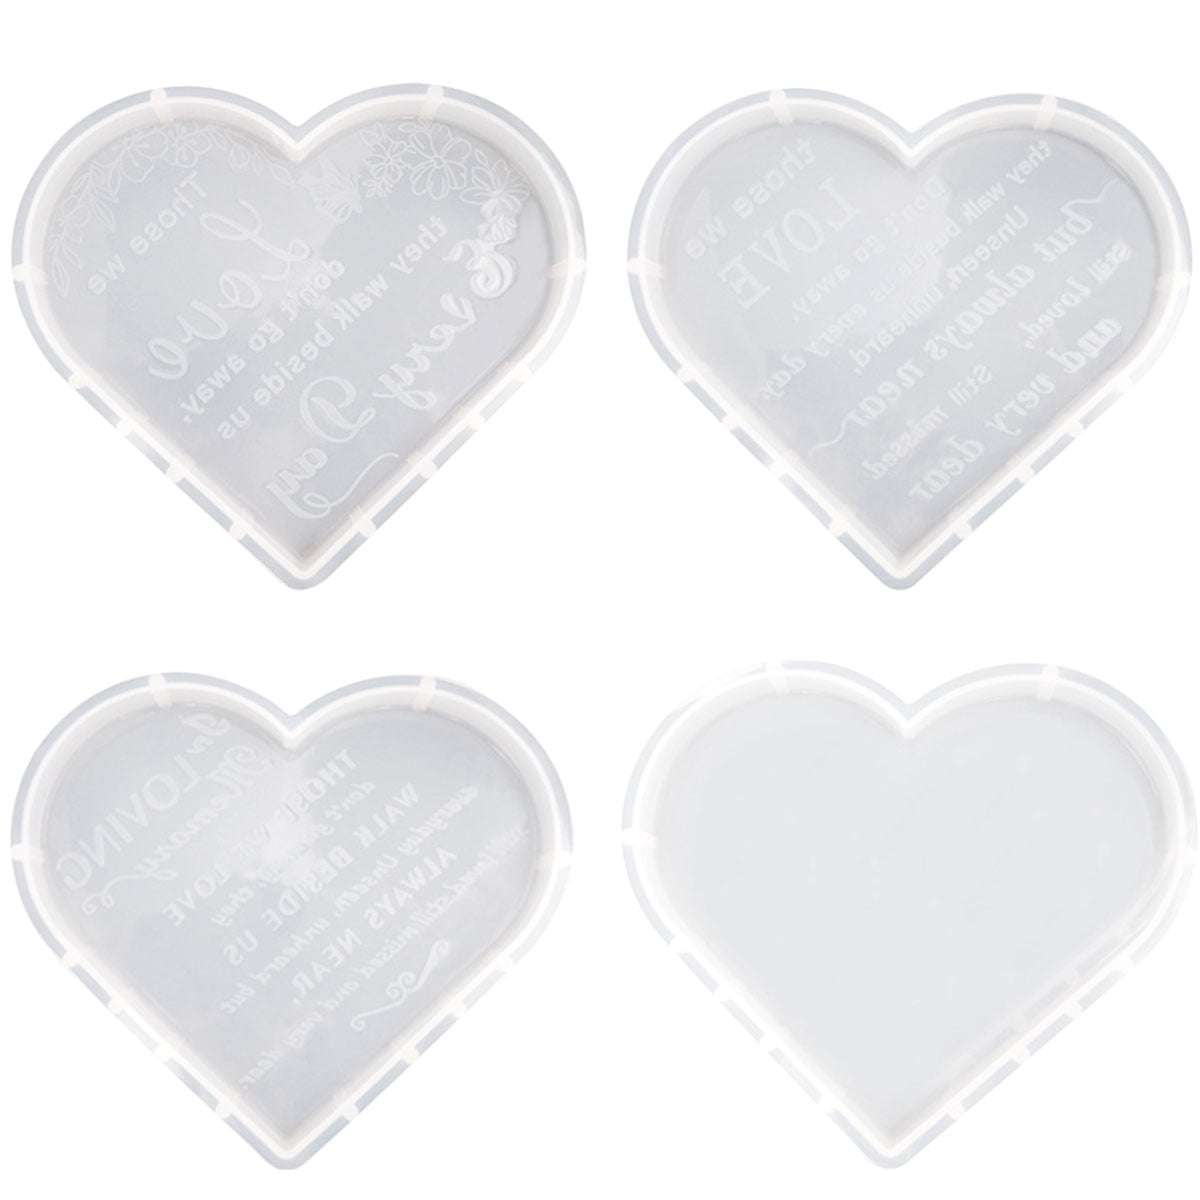 9x9x0.75 Heart Shaped Silicone Mold for Epoxy Resin - Heart Mold